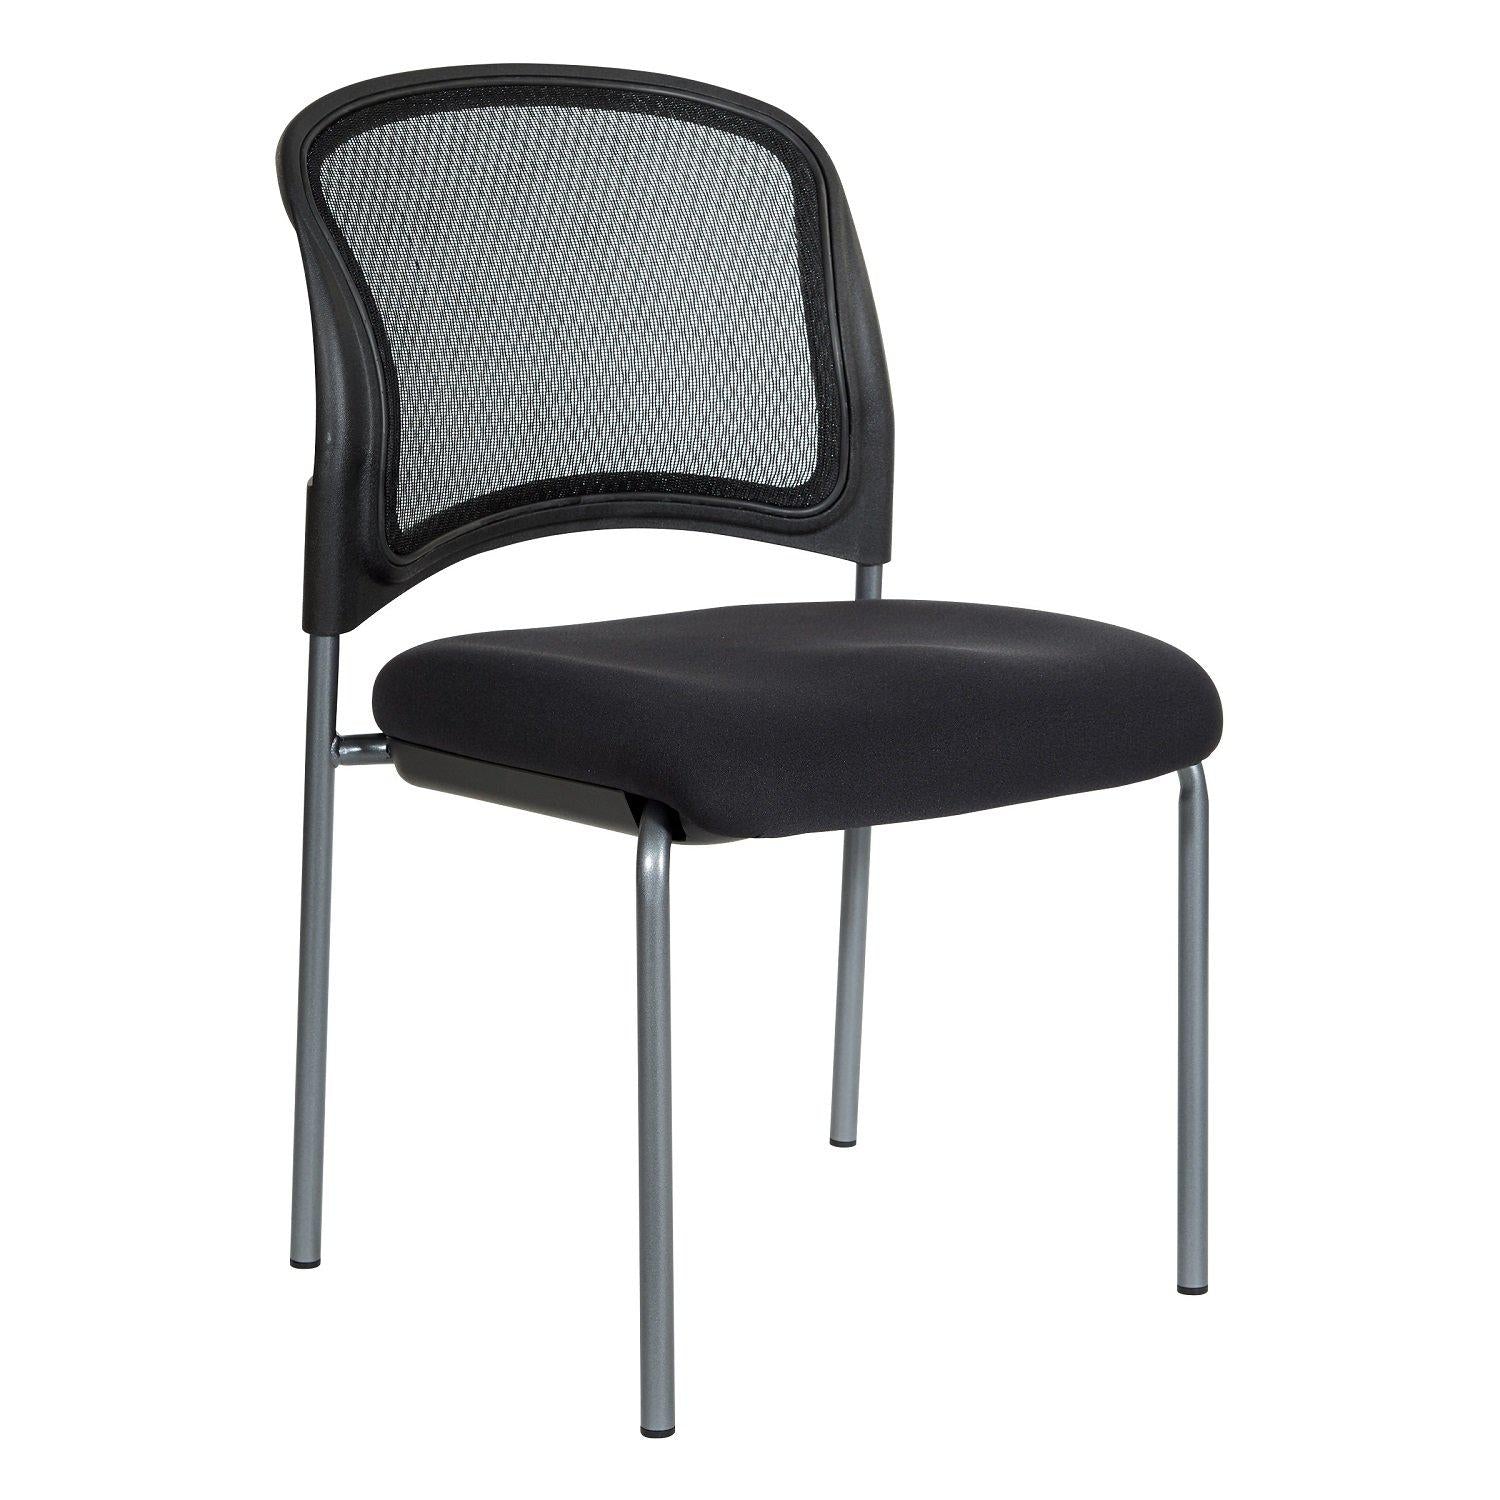 ProGrid® Mesh Back Titanium Finish Stacking Visitor's Chair